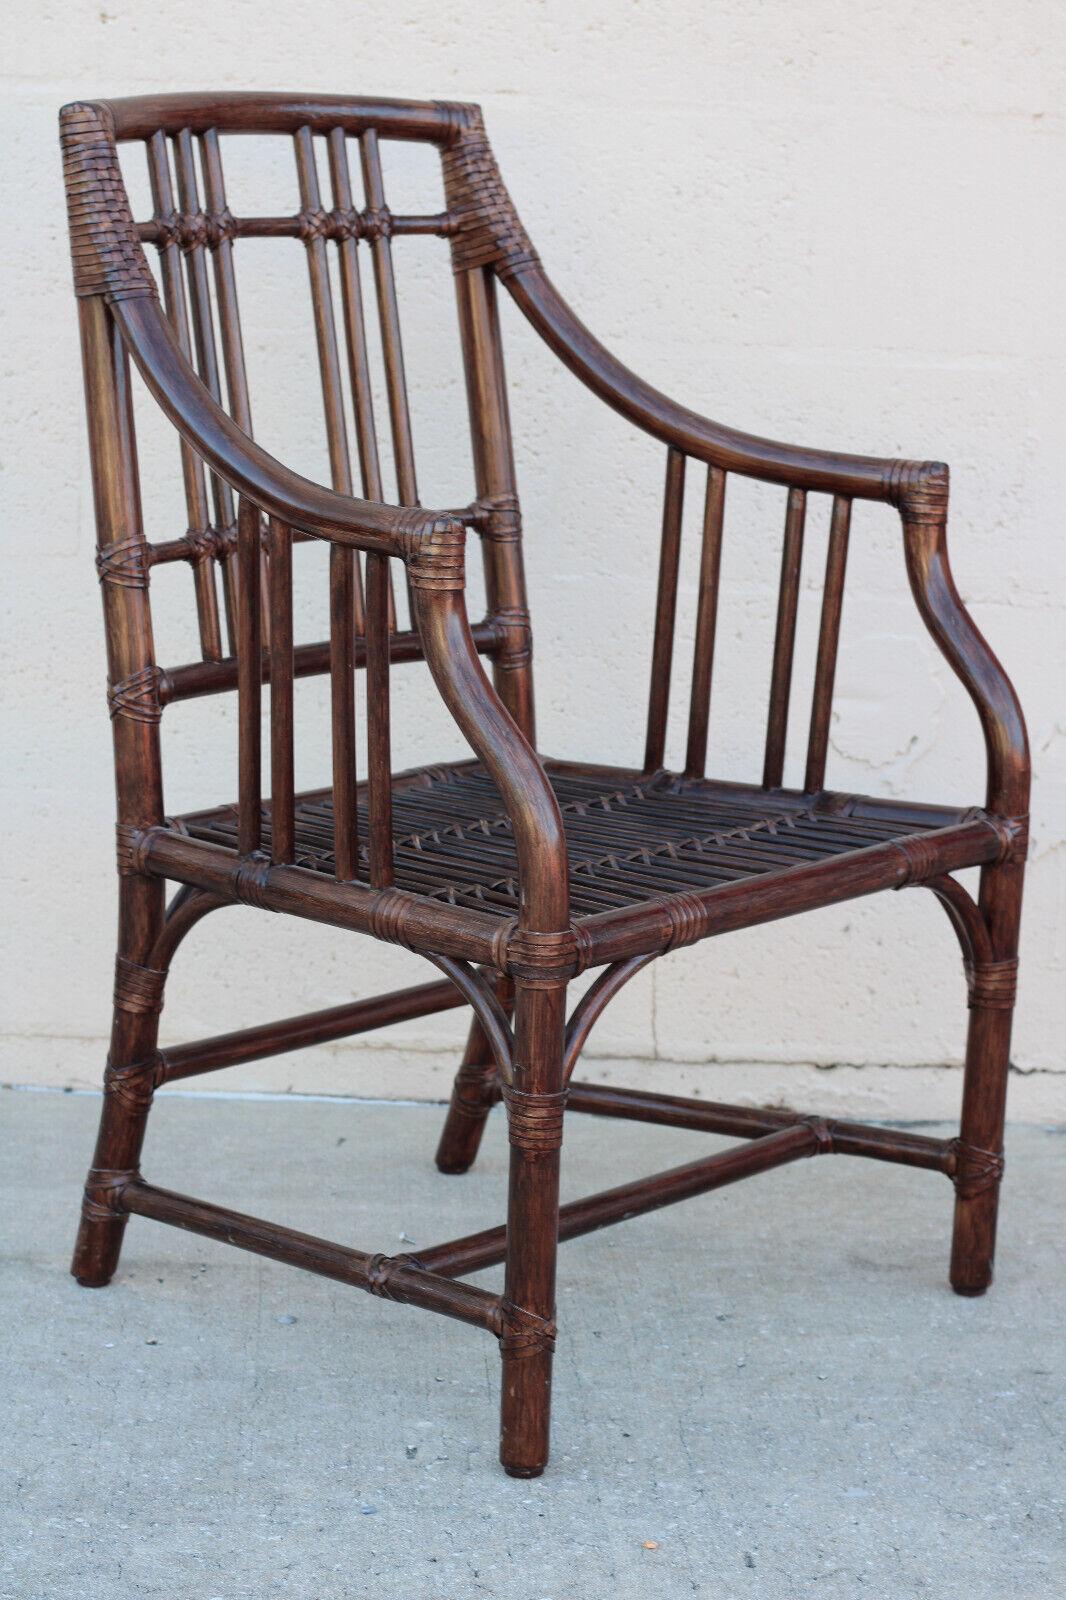 A set of Four McGuire Balboa Rattan Arm Chairs or Dining Chairs. Featuring Craftsman details, the Balboa Arm Chair, designed by Elinor McGuire, is a classic form that could fit many different spaces. This set of chairs has a rich dark tobacco